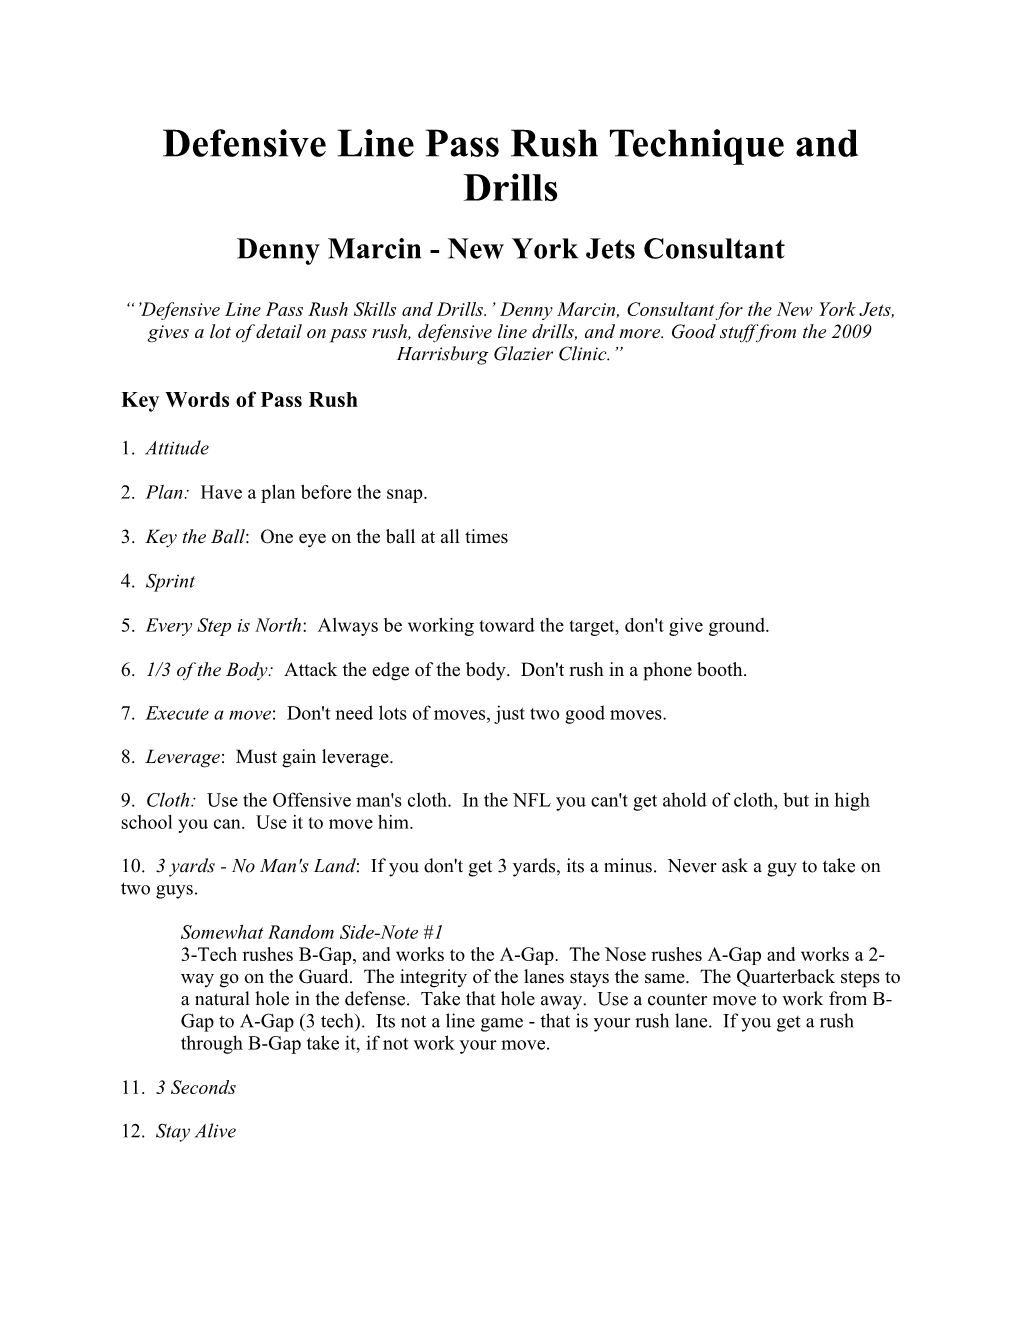 Defensive Line Pass Rush Technique and Drills Denny Marcin - New York Jets Consultant